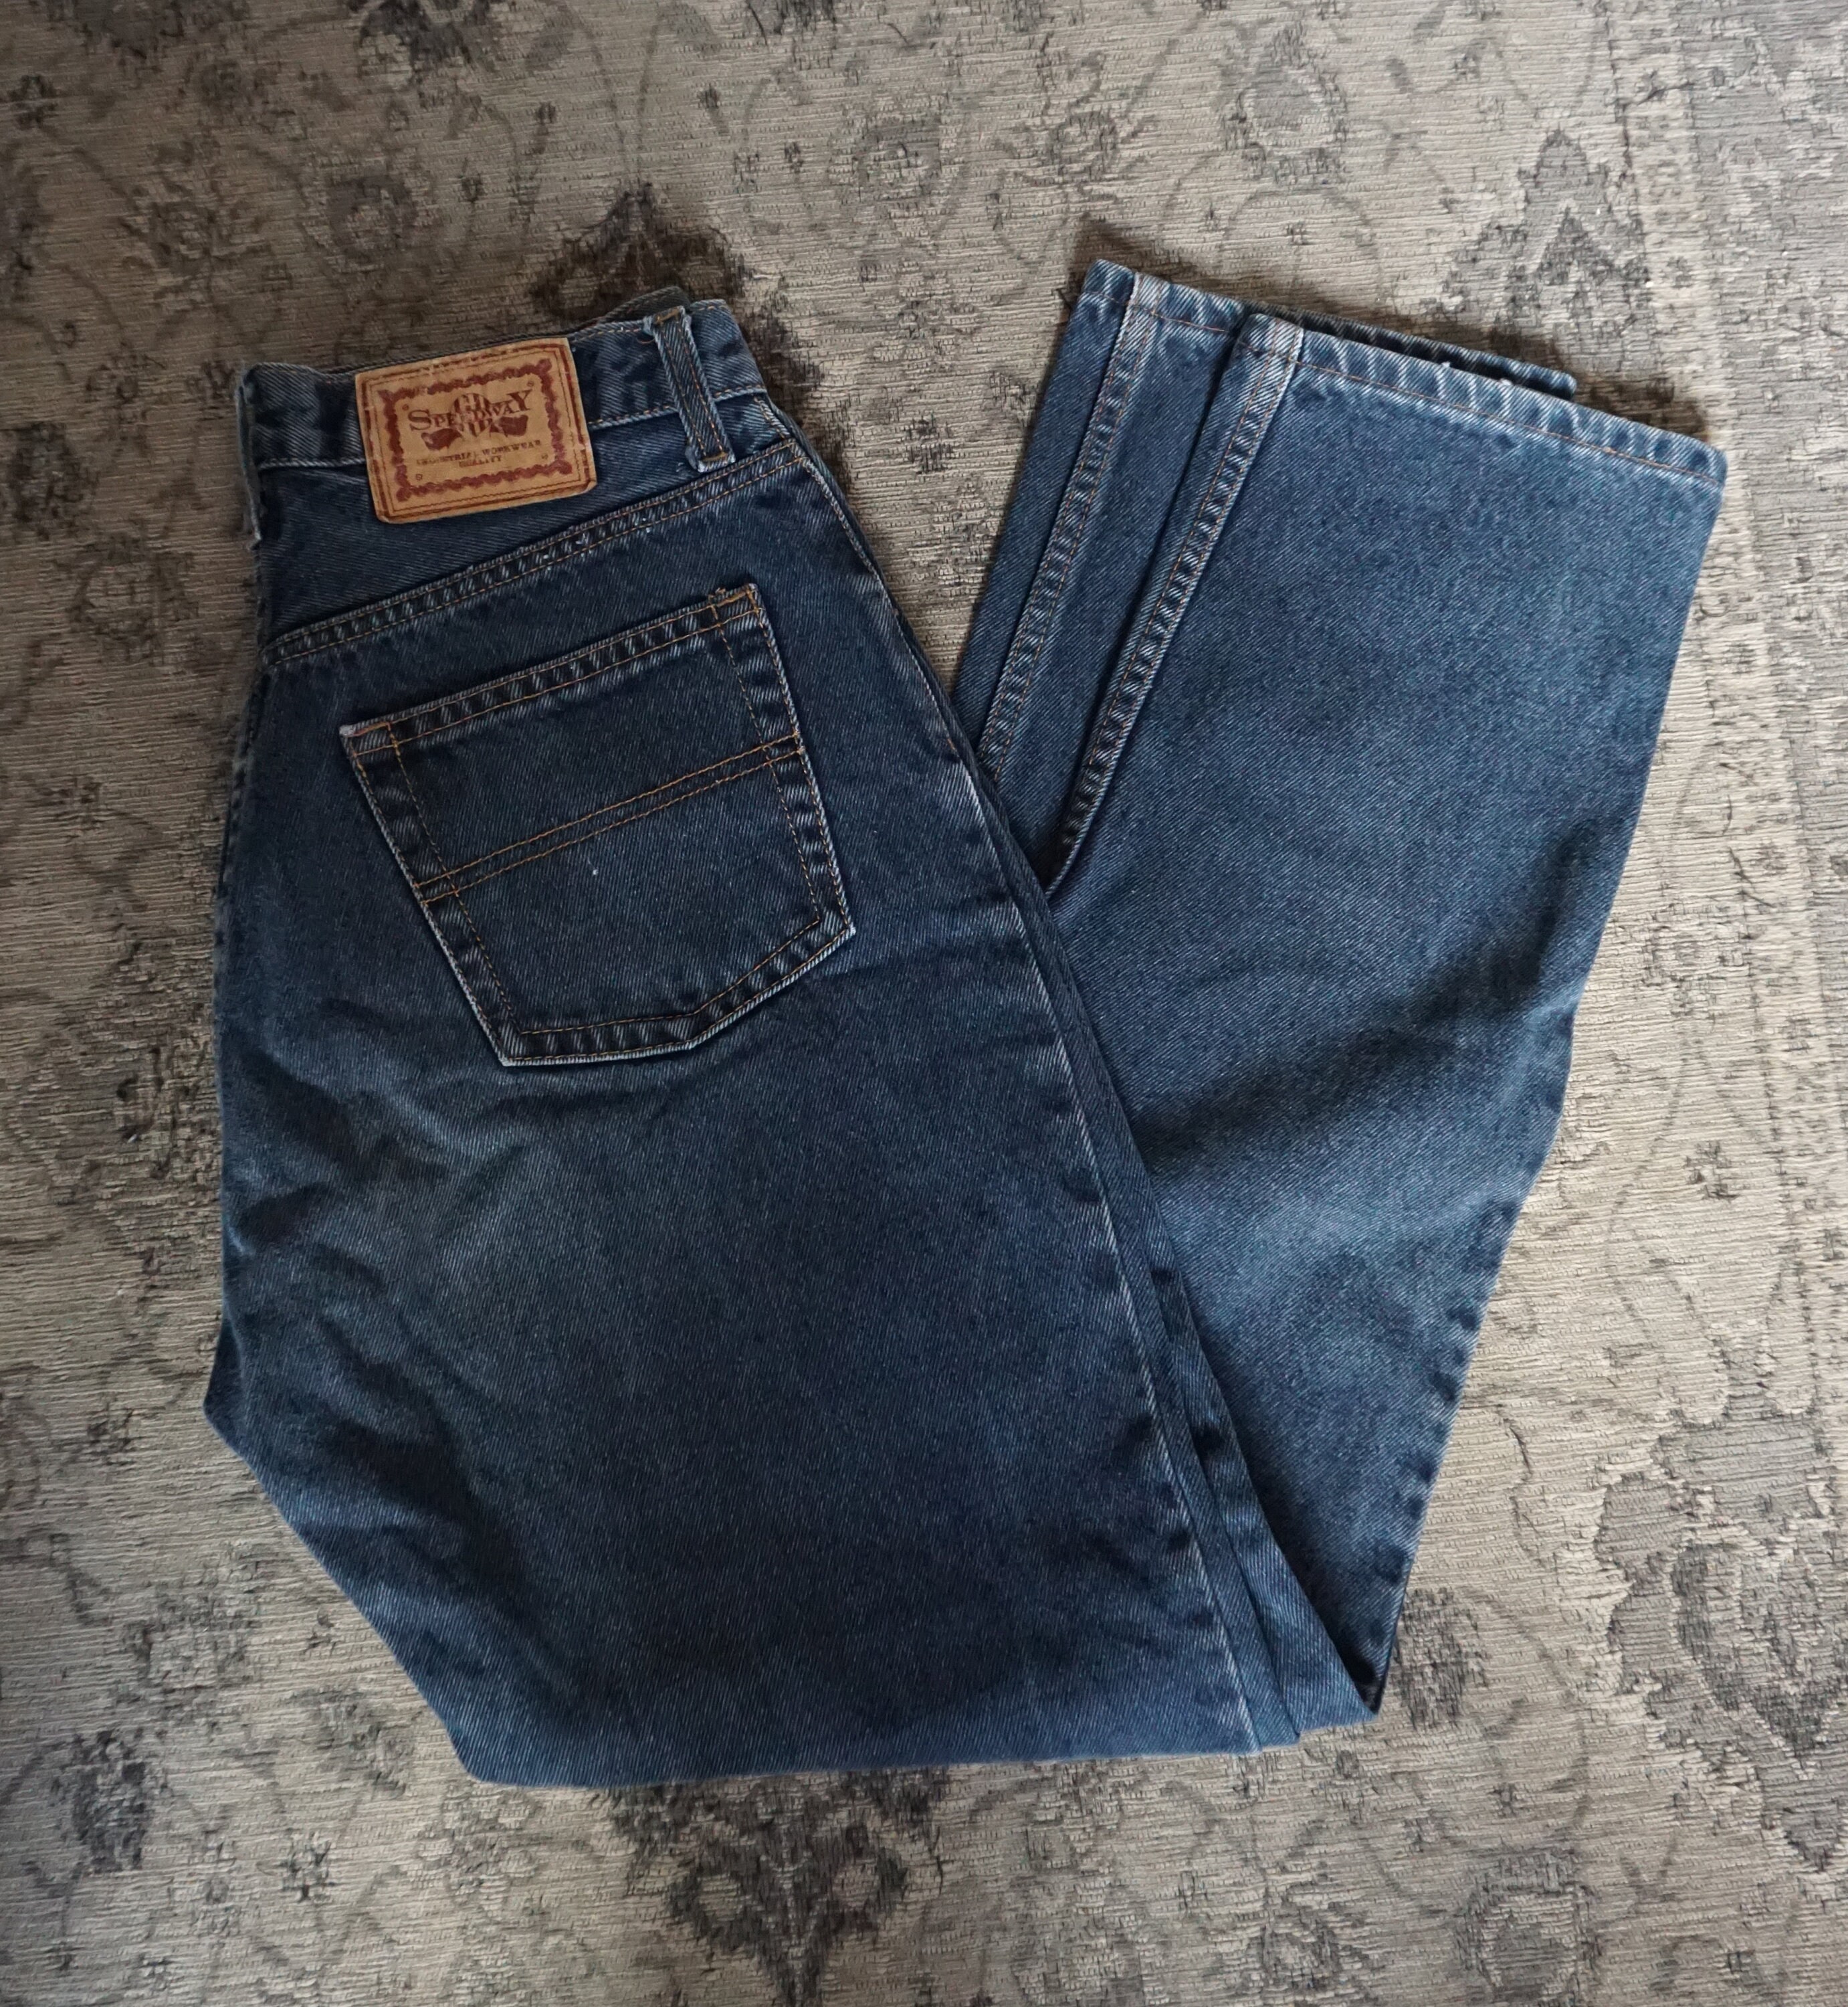 90s Vintage Relaxed Fit NY Jeans Womens Size 12 Waist 32 High Waist